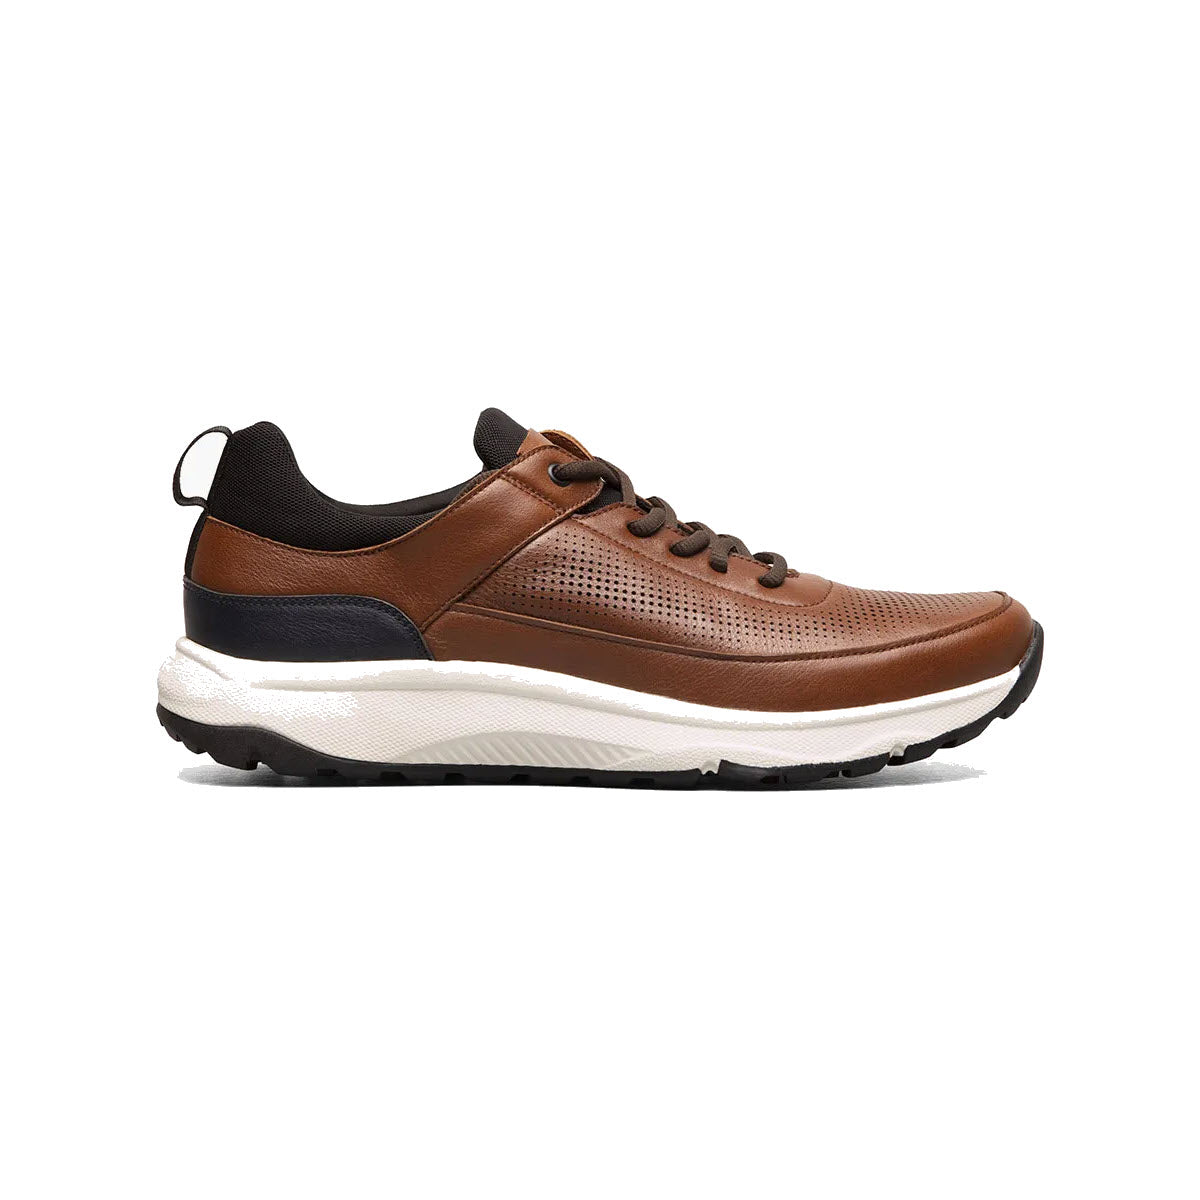 A single Florsheim FLORSHEIM SATELLITE PERF ELASTIC LACE SLIP ON SNEAKER COGNAC - MENS featuring brown leather, white soles, black accents, and a Comfortech footbed on a white background.